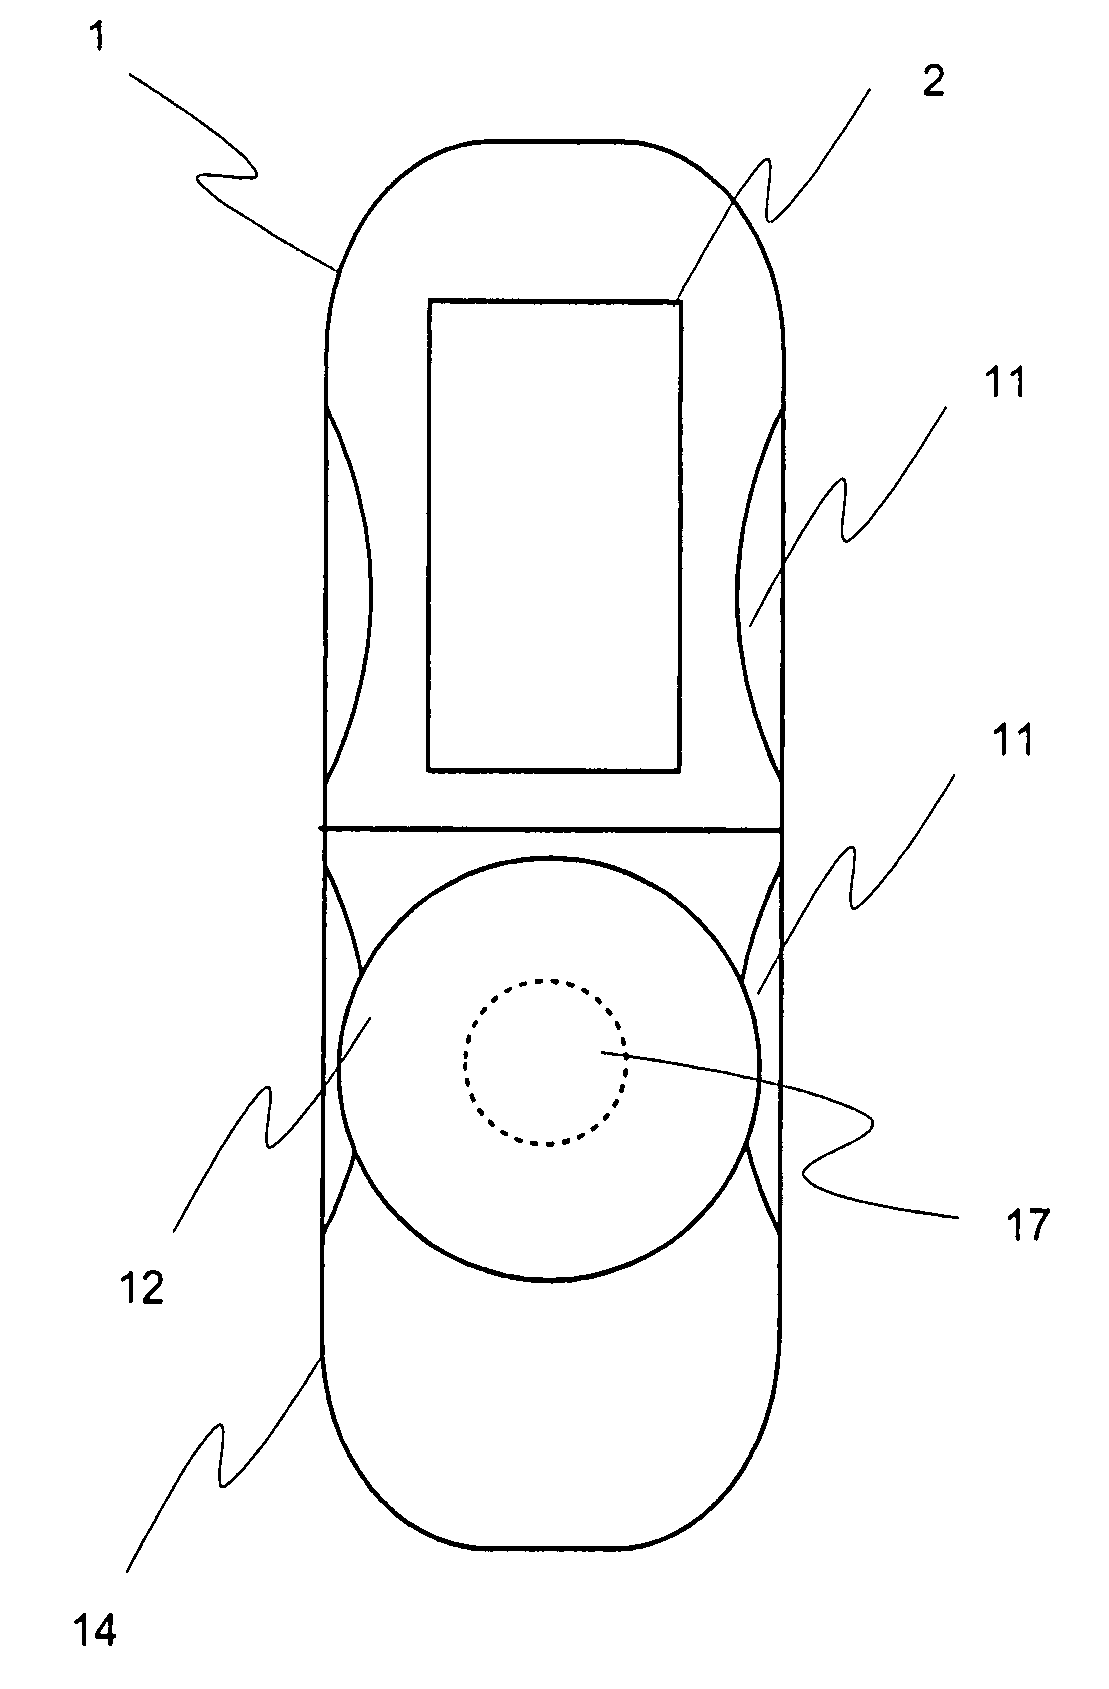 Input device of mobile devices